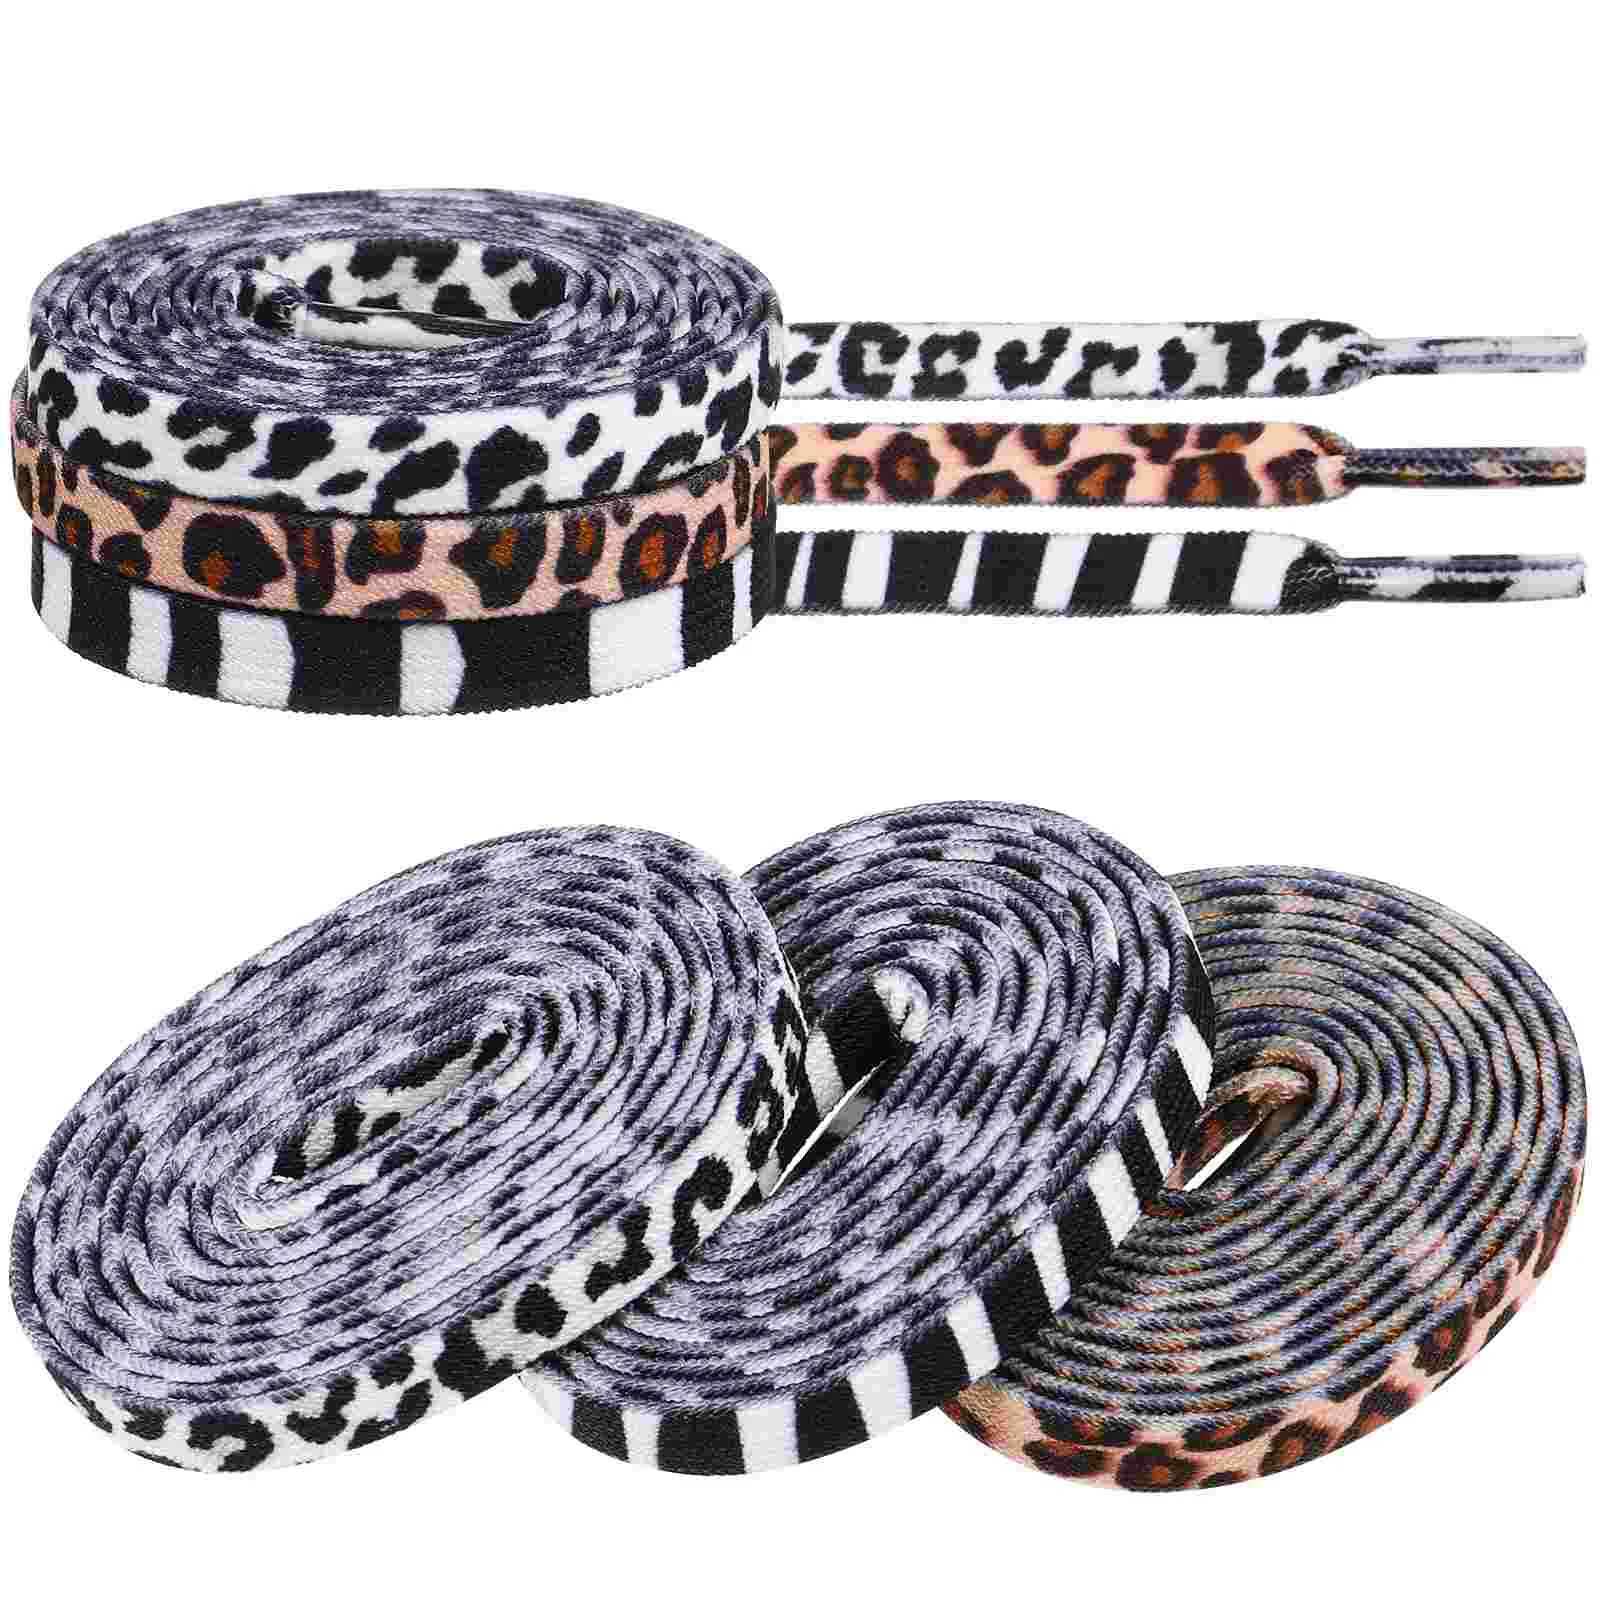 

3 Pairs White Shoe Laces Shoelace Flat Elastic Ties Ice Skates Sneaker Sneakers Casual Shoes Rainbow Child